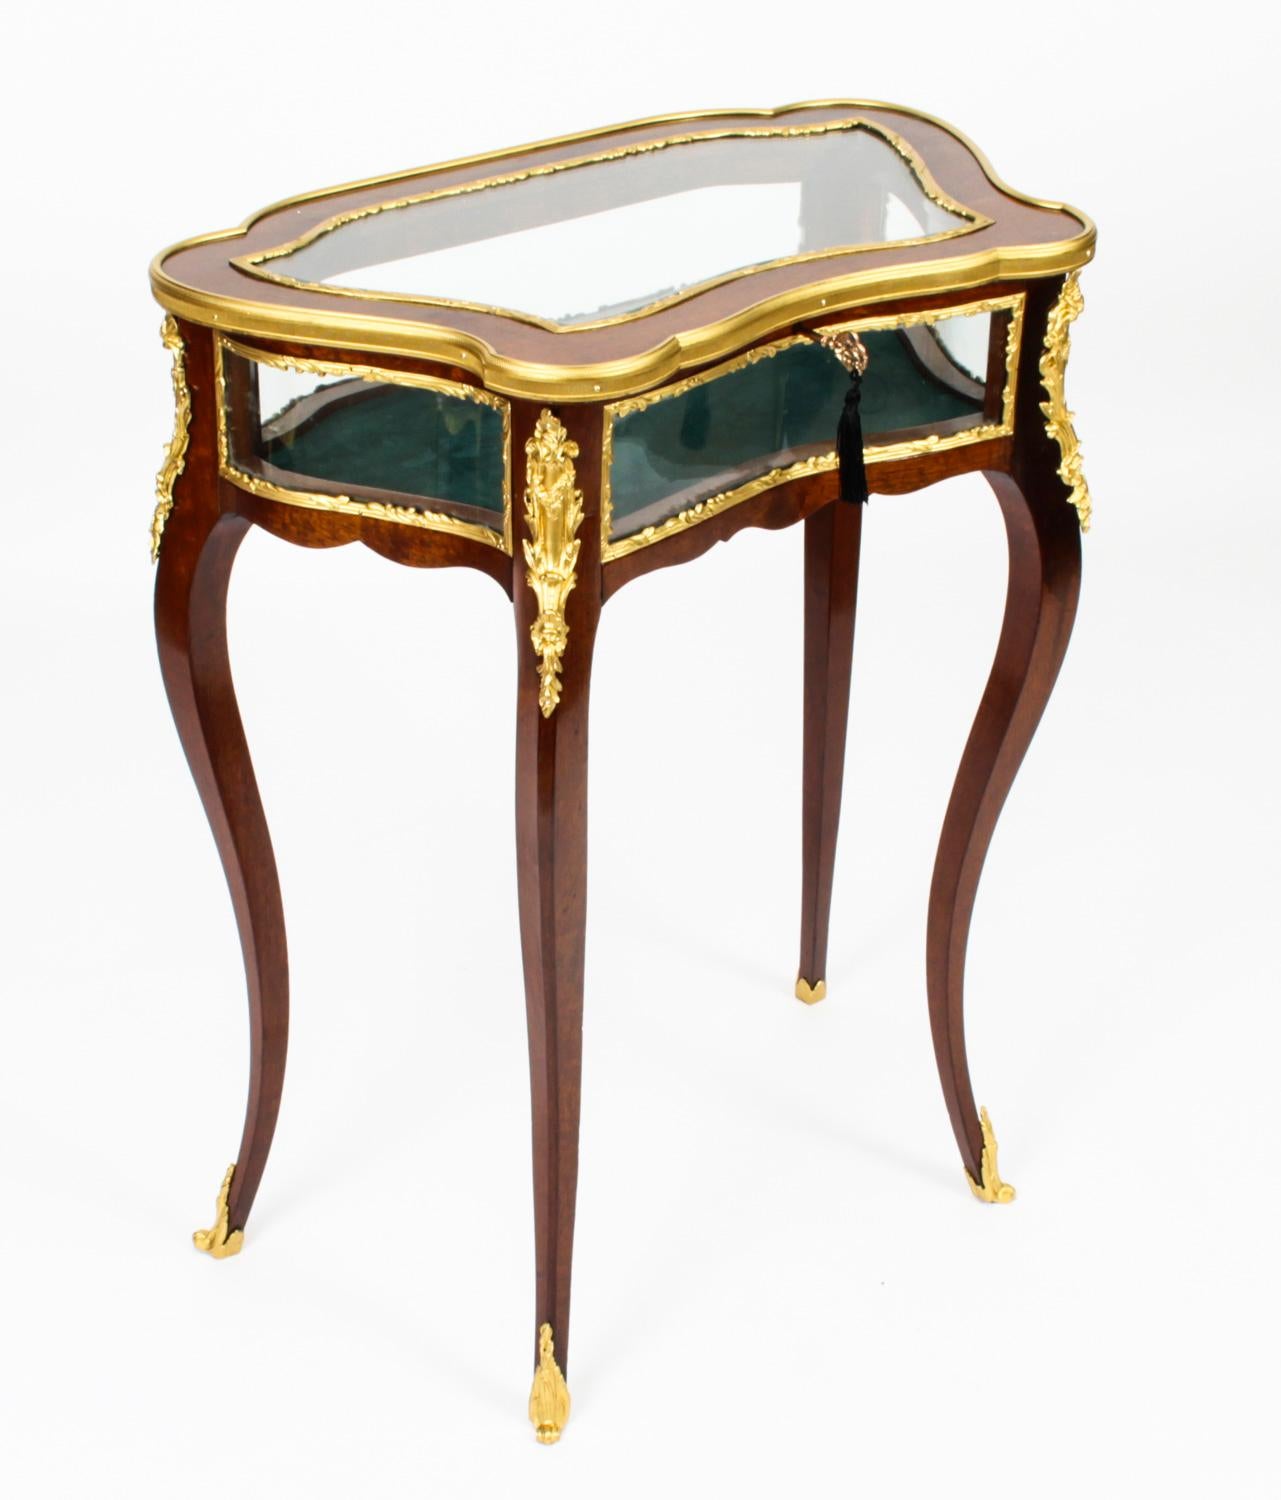 This is a beautiful pair of antique French mahogany and ormolu mounted Louis Revival bijouterie display tables, circa 1860 in date.
 
The shaped display tables each feature a bevelled glass top, serpentine glass sides and dark blue velvet lining.
